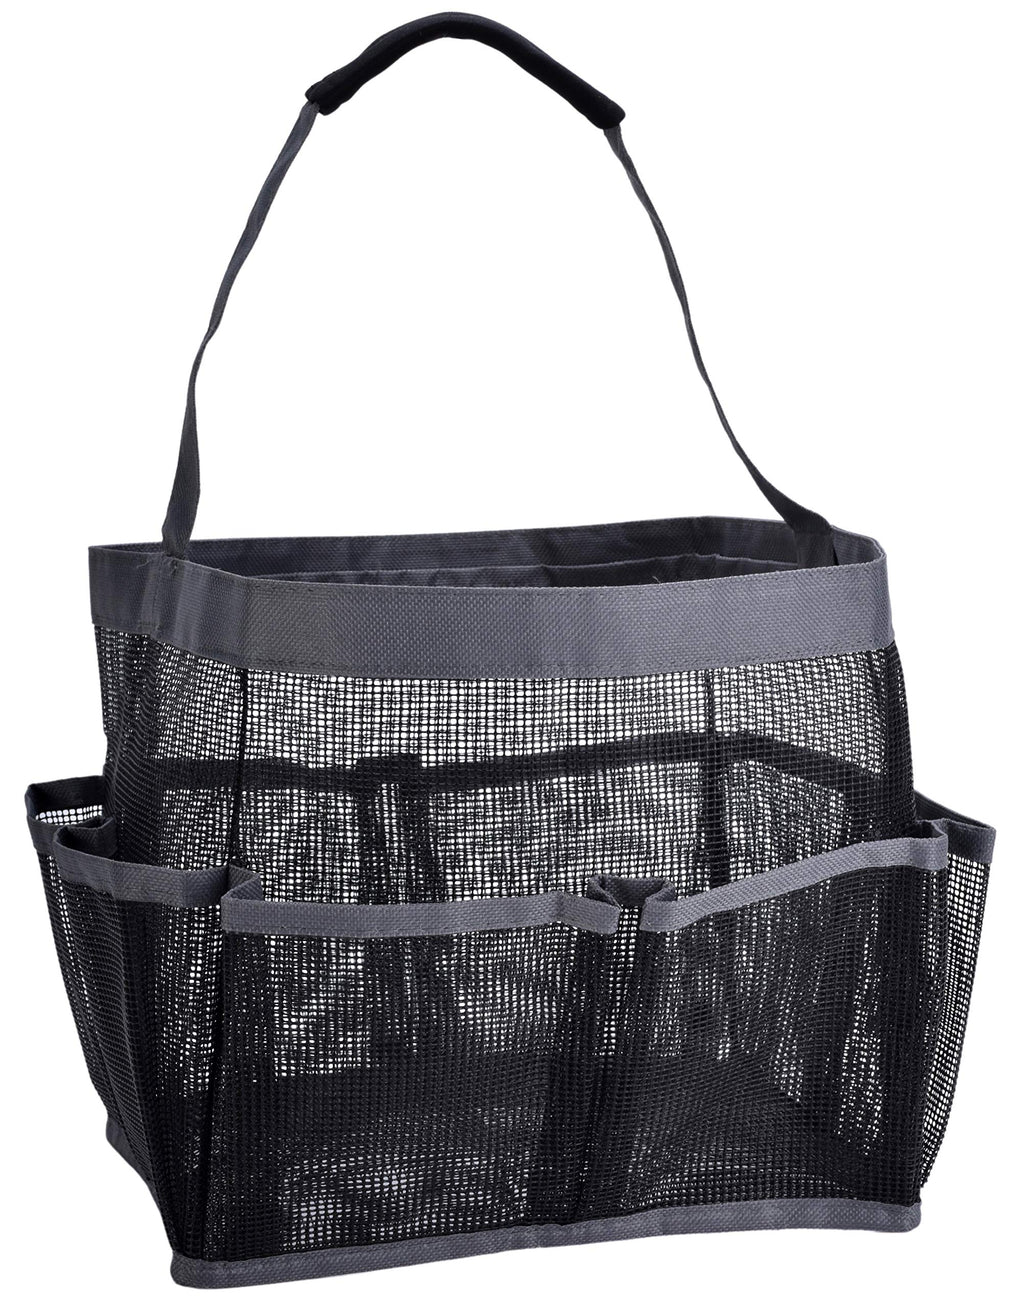 [Australia] - Mesh Shower Bag - Easily Carry and Organize Your Bathroom Accessories and Toiletry Essentials While Taking a Shower. (9-Pockets | Black) 